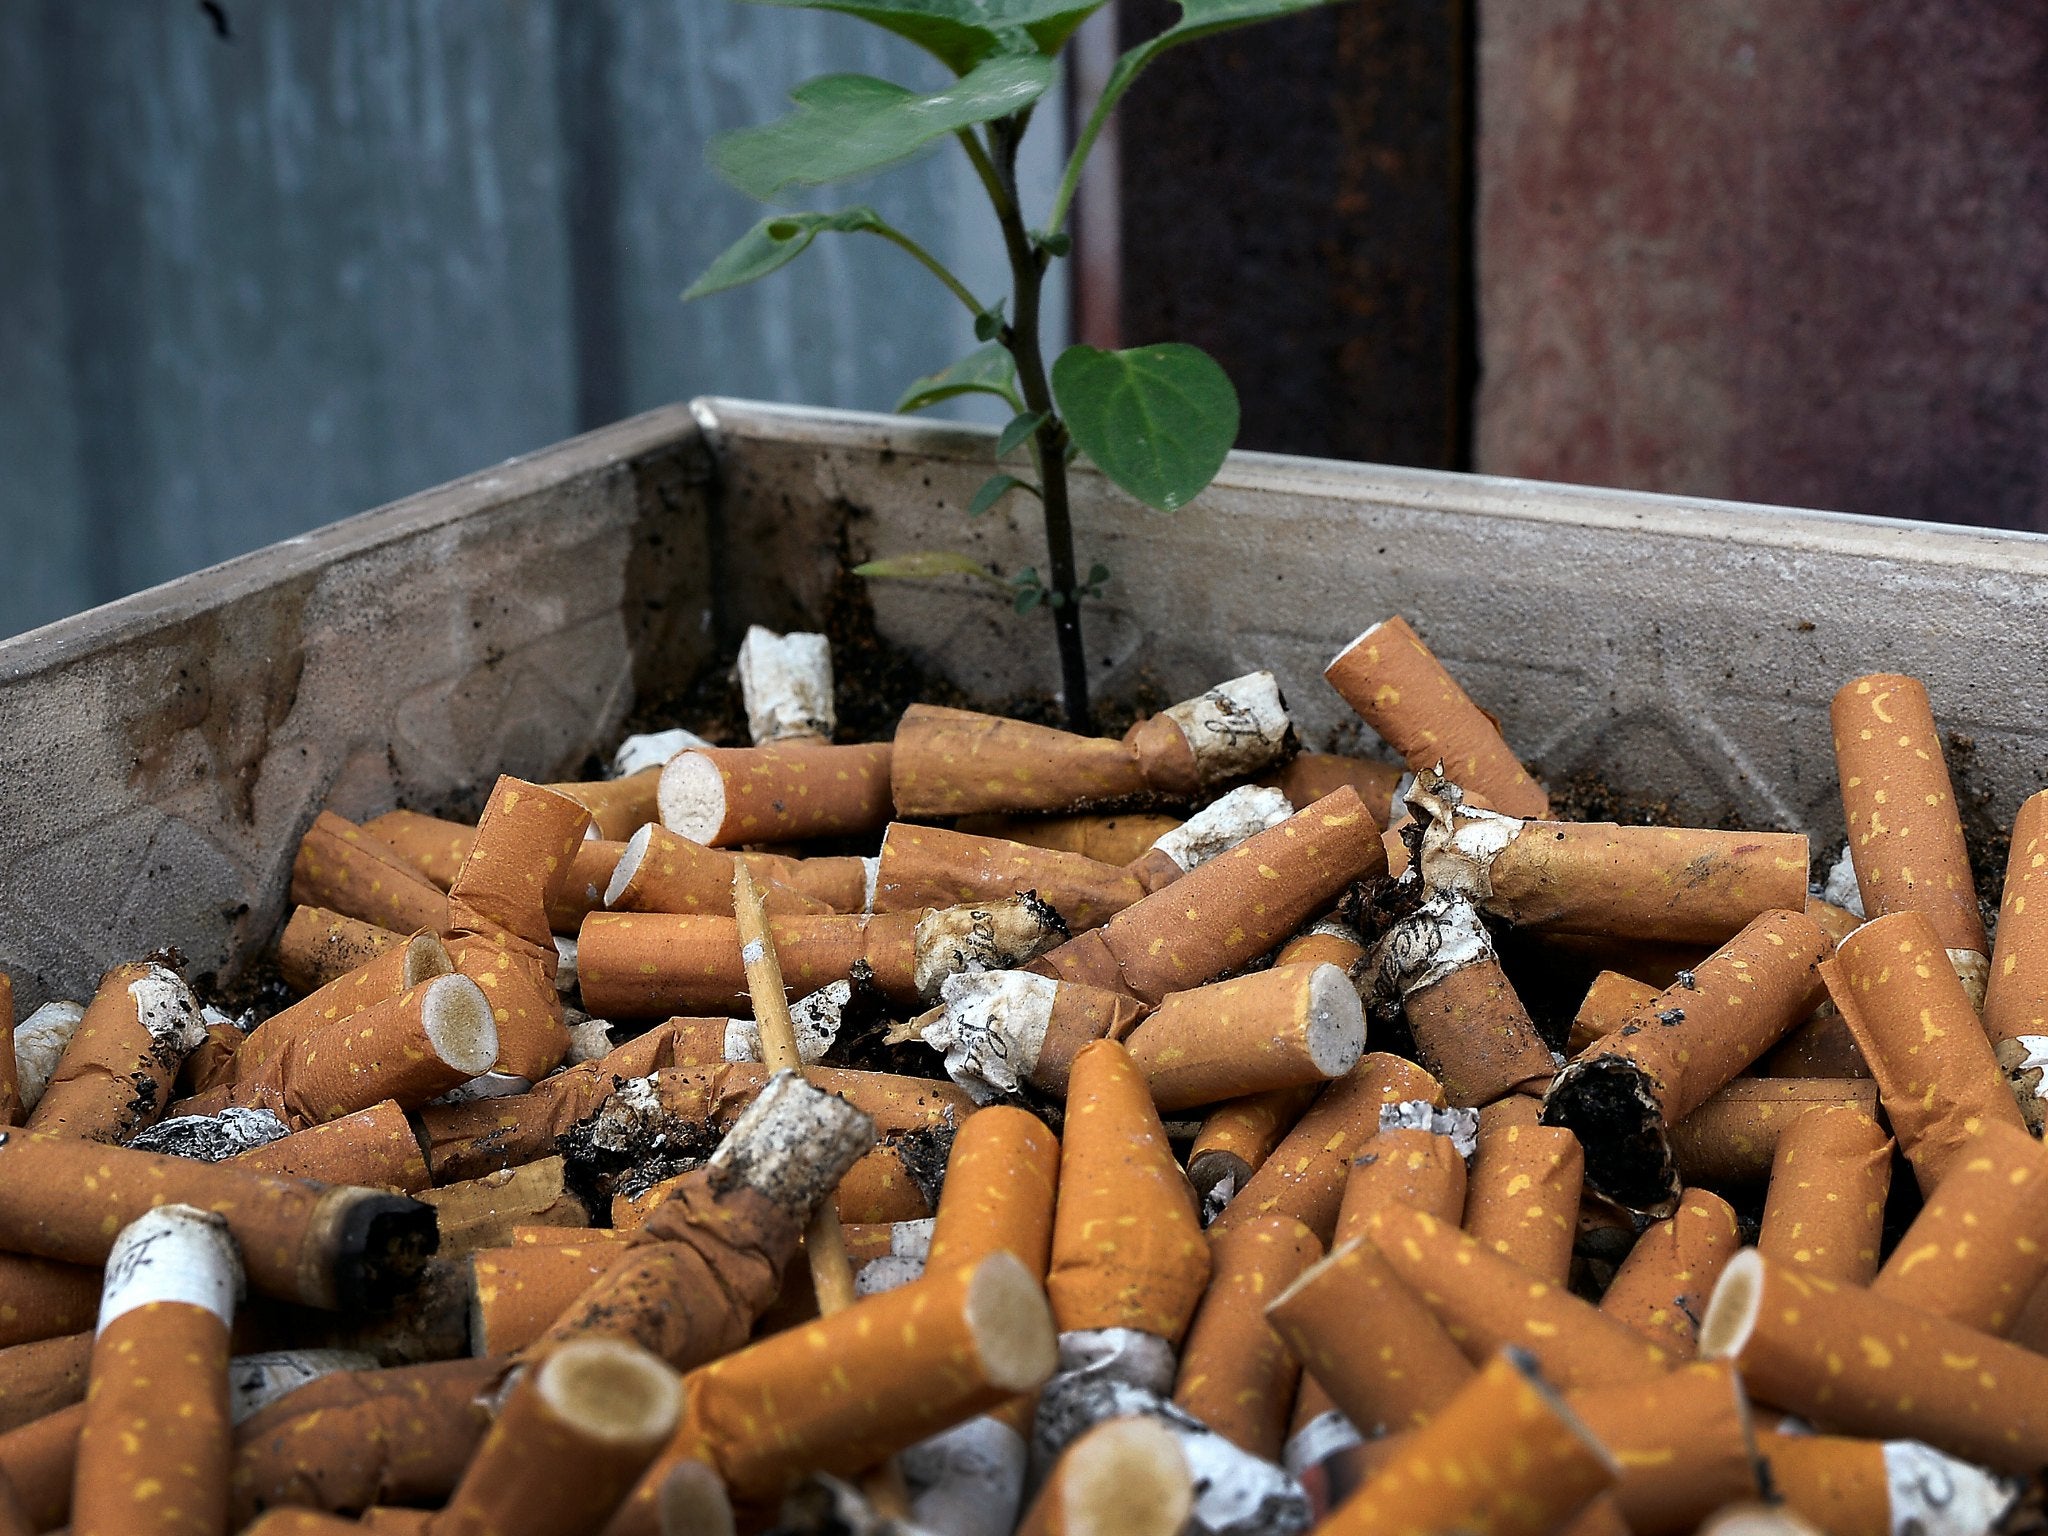 Cigarette butts cost local authorities up to £40 million a year to clean up